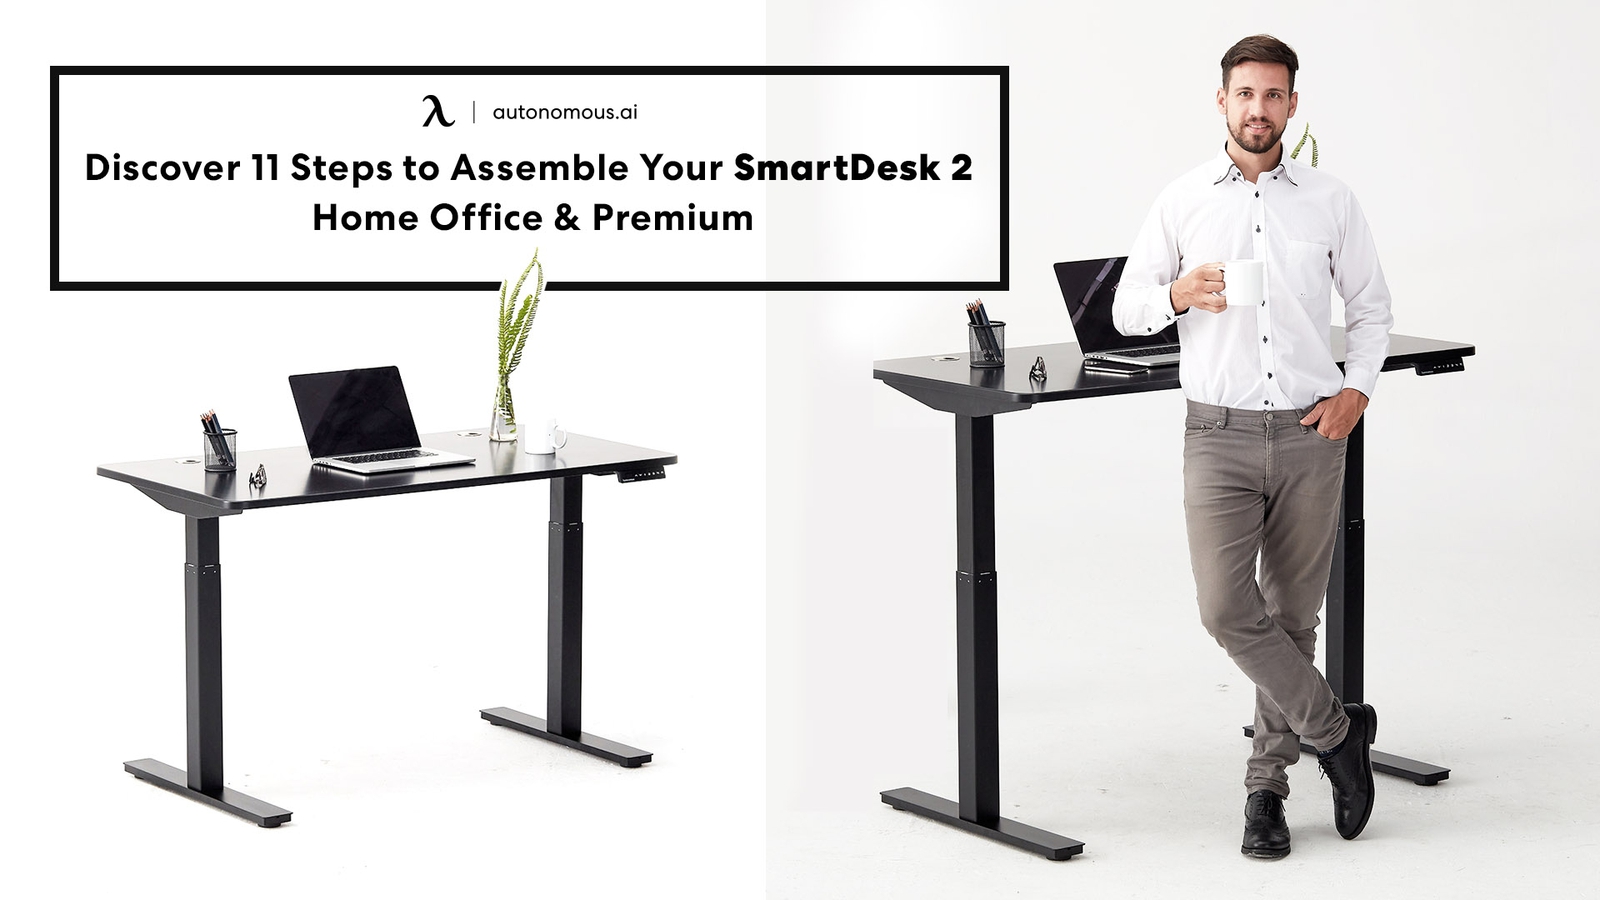 Discover 11 Steps to Assemble Your SmartDesk Core & Pro